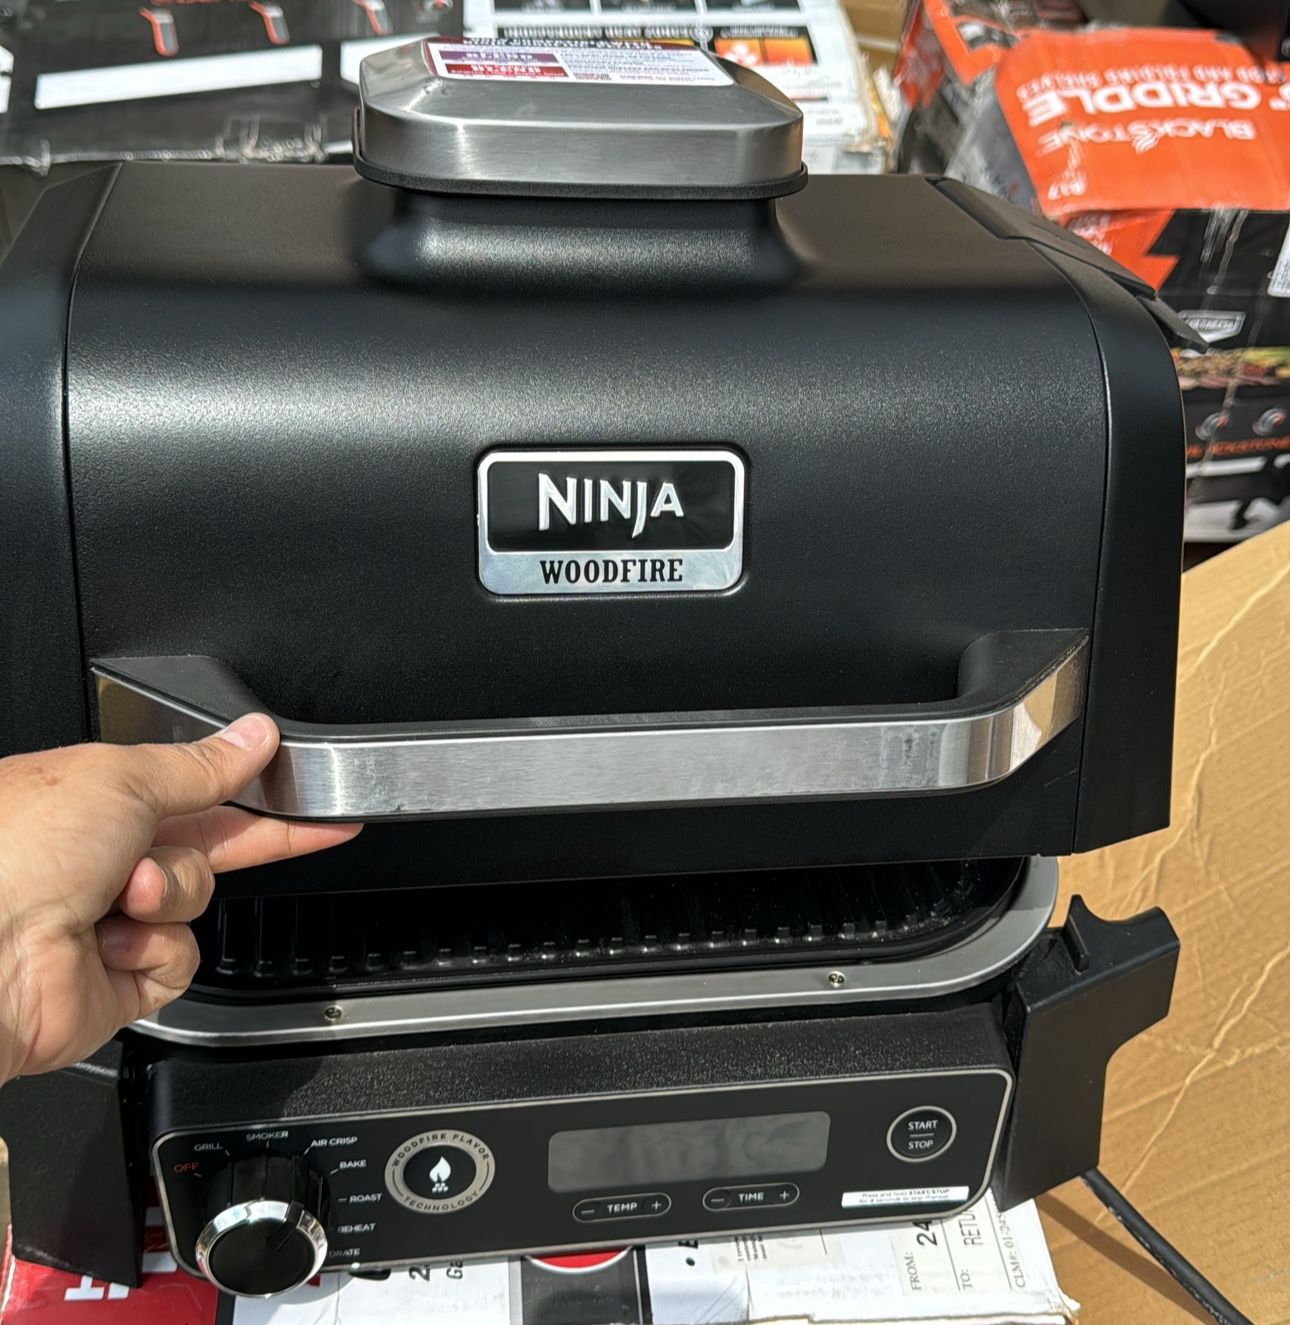 Ninja Woodfire 3-in-1 Outdoor Grill, Master Grill, BBQ Smoker, & Outdoor Air Fryer with Woodfire Technology,